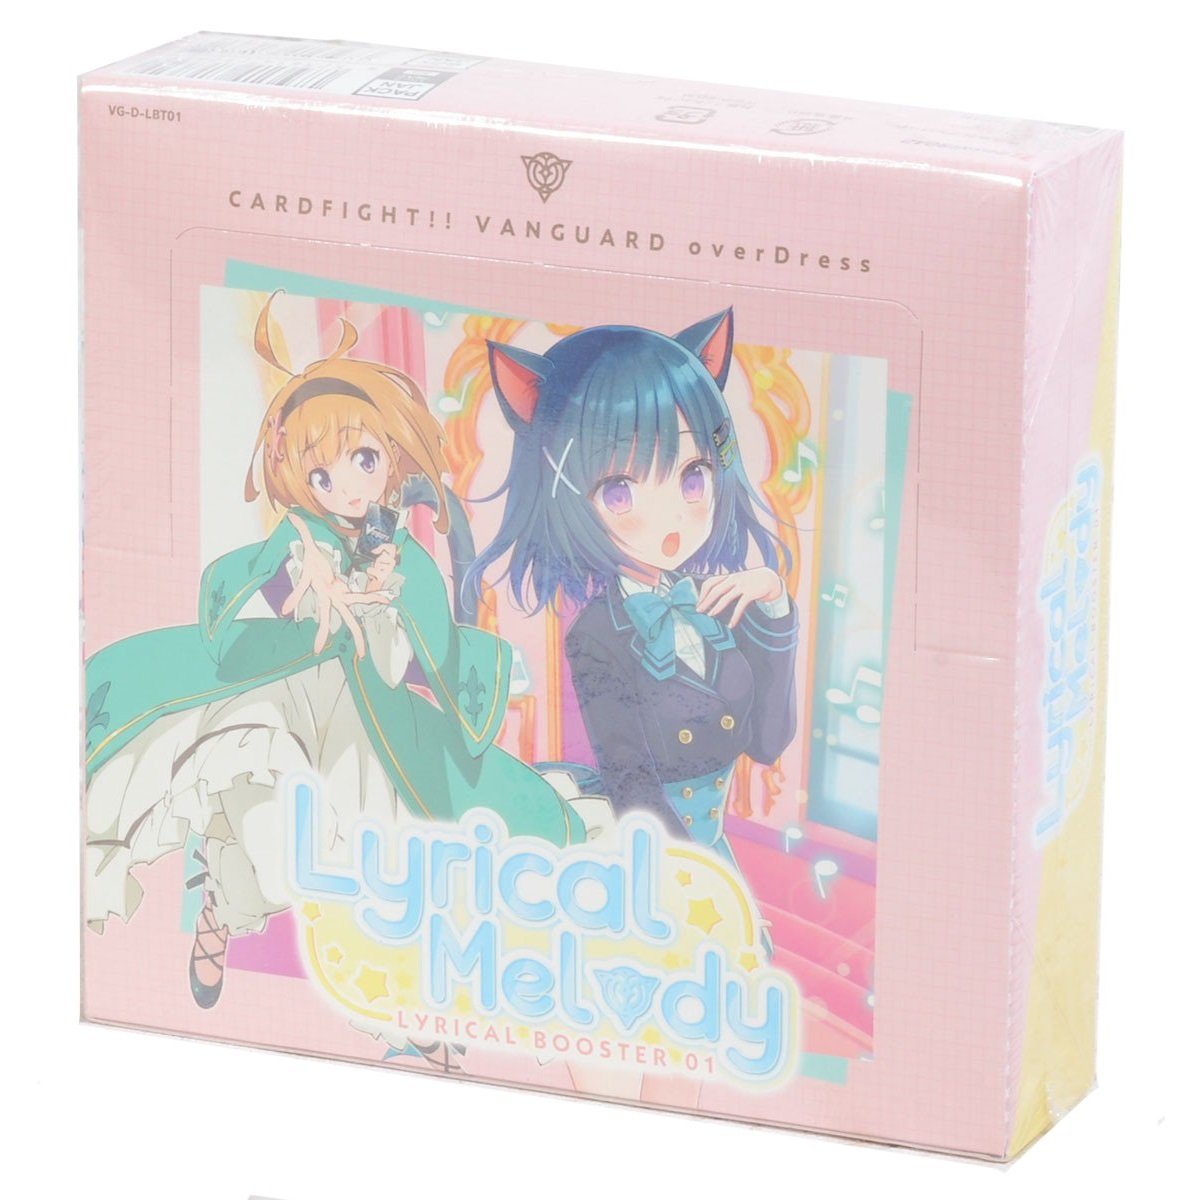 Cardfight Vanguard overDress Lyrical Booster 1st "Lyrical Melody" [VG-D-LBT01] (Japanese)-Booster Box (16packs)-Bushiroad-Ace Cards & Collectibles